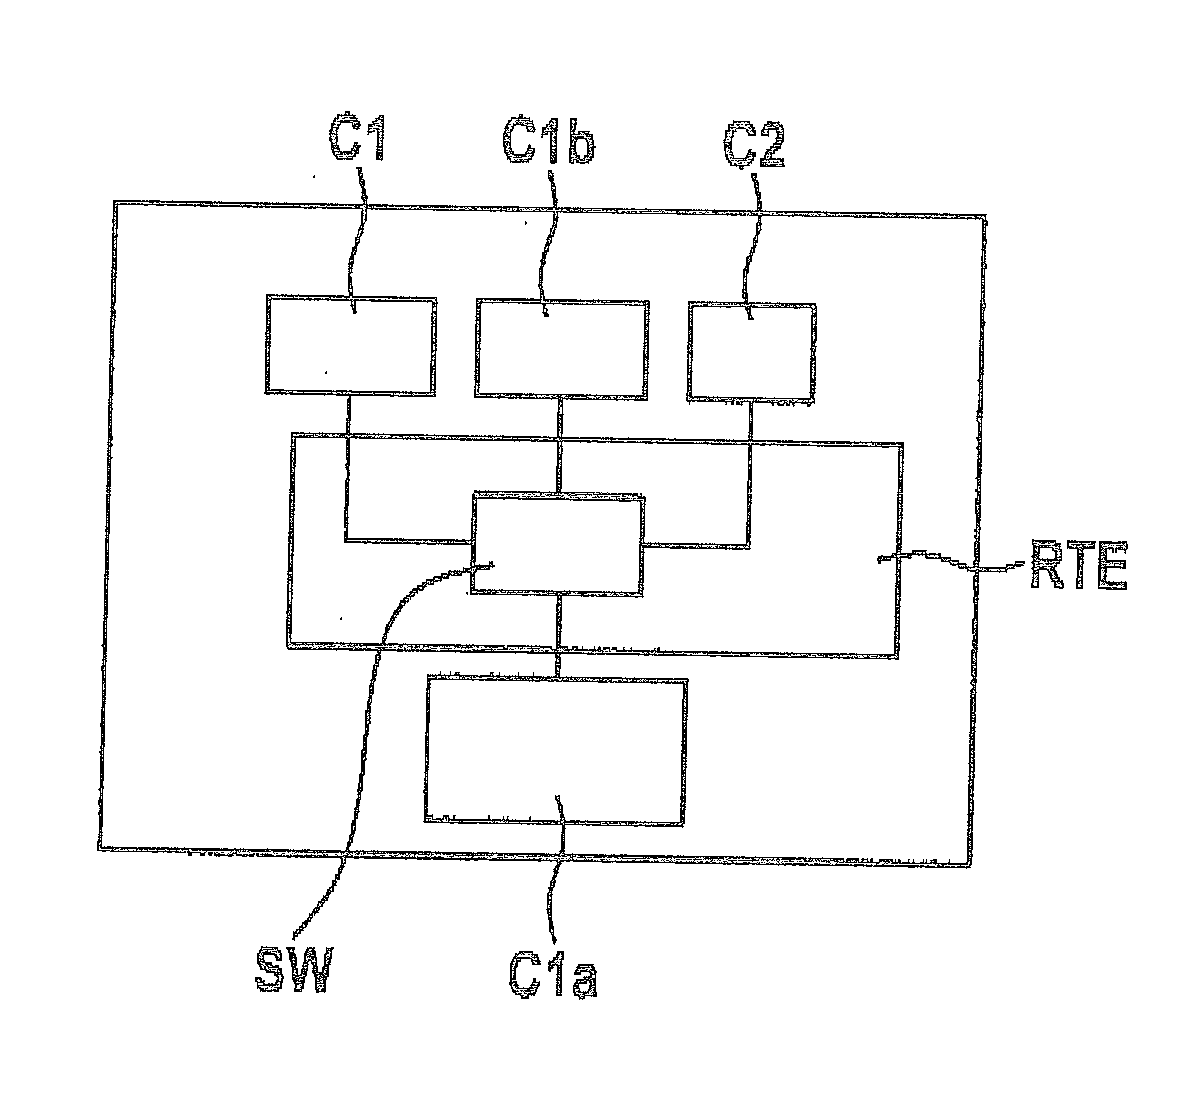 Method of bypassing an autosar software component of an autosar software system